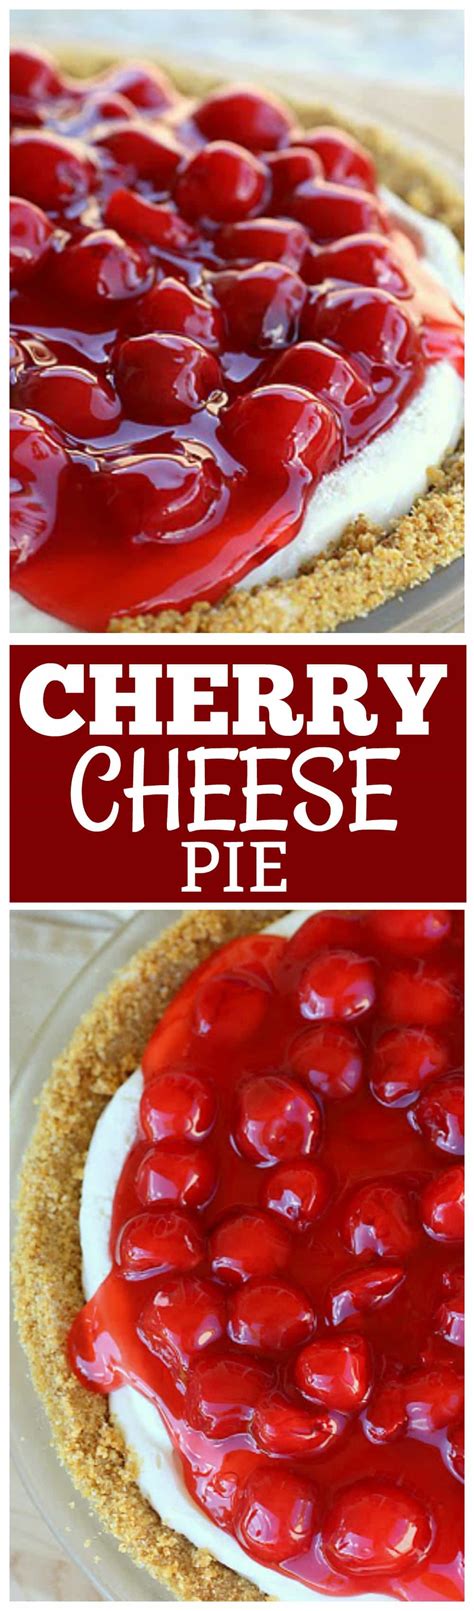 Cherry Cheese Pie Recipe The Girl Who Ate Everything